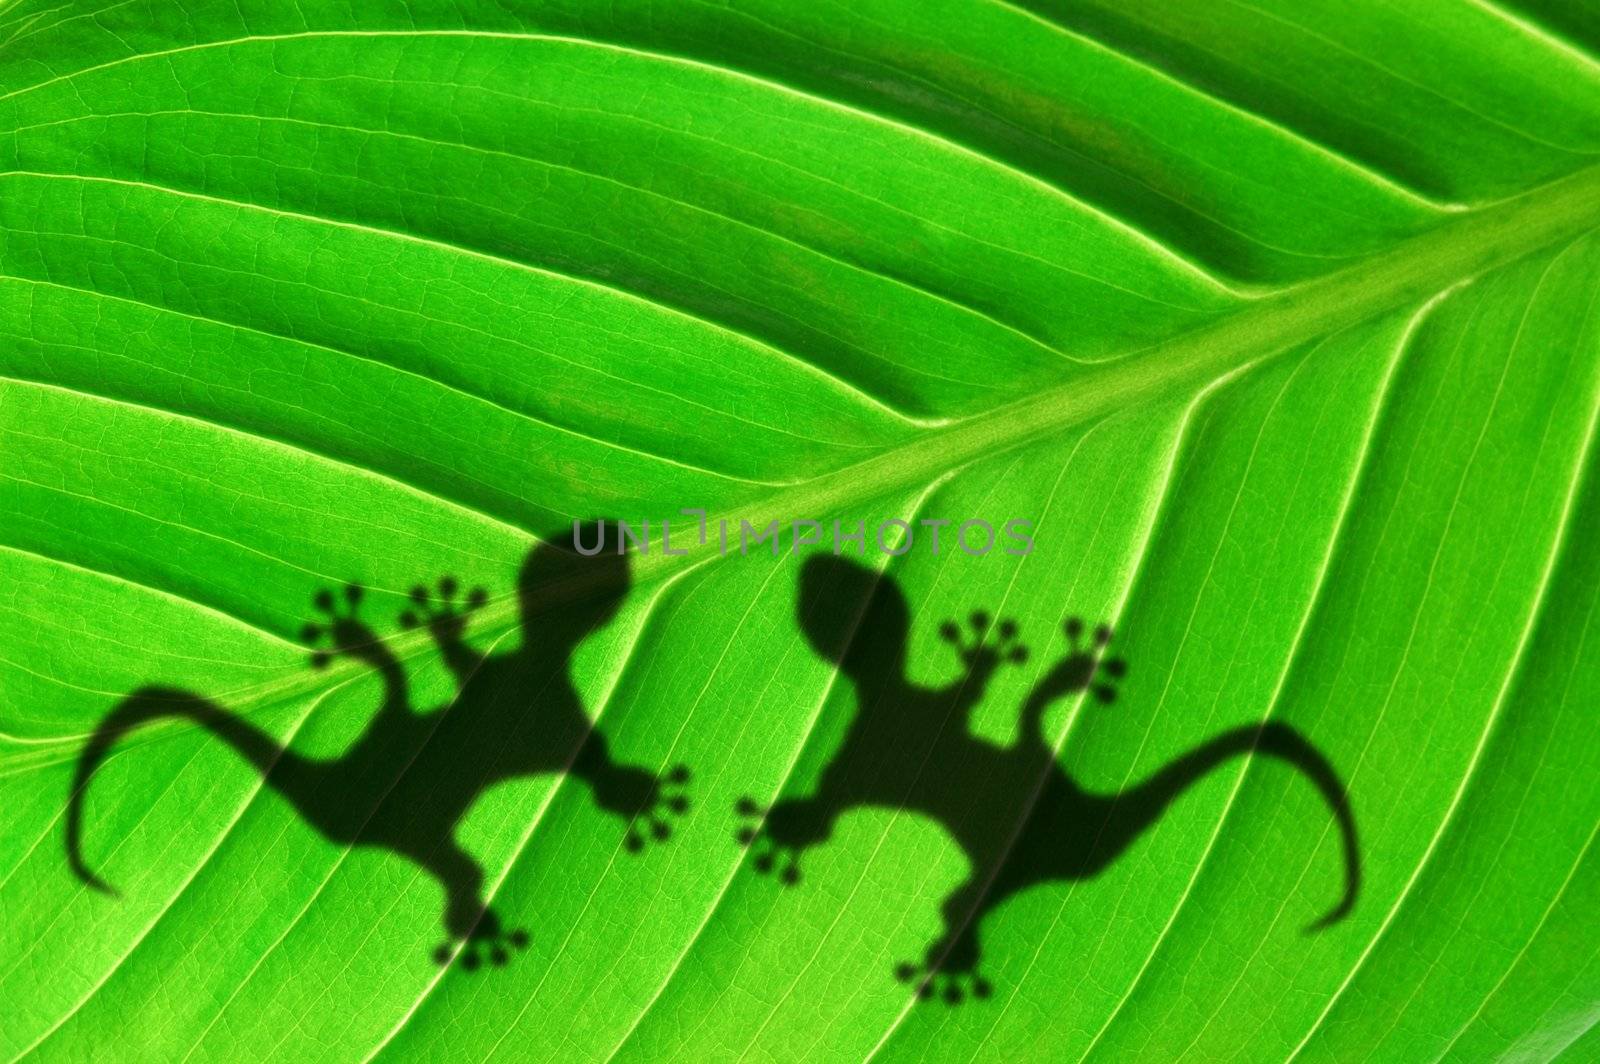 tropical background with leaf and gecko or lizard animal